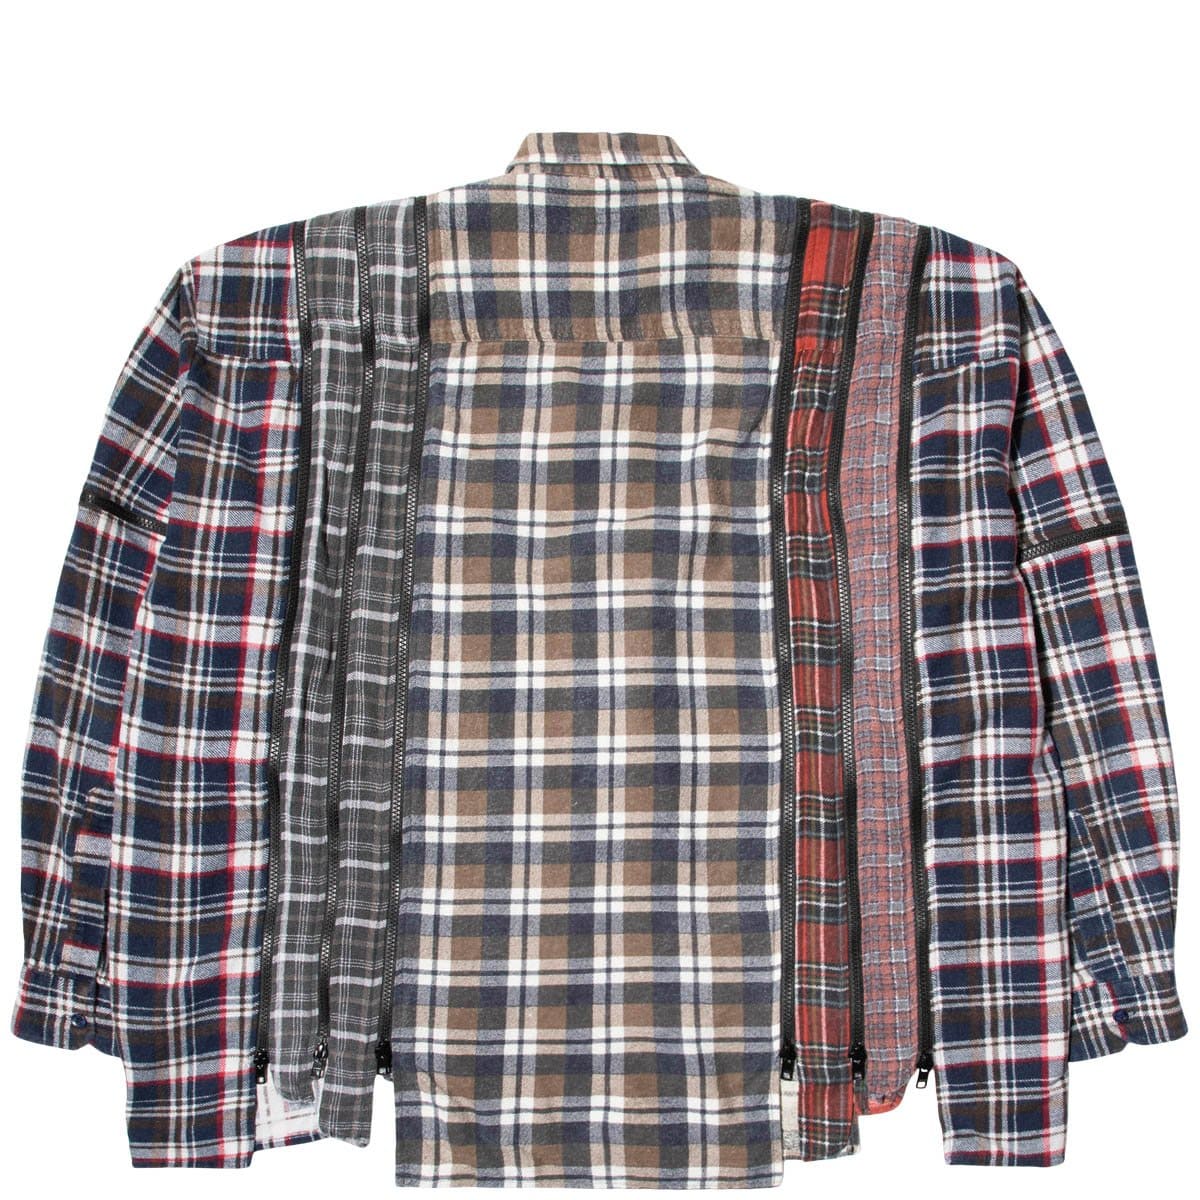 Needles Shirts ASSORTED / O/S 7 CUTS ZIPPED WIDE FLANNEL SHIRT SS21 11